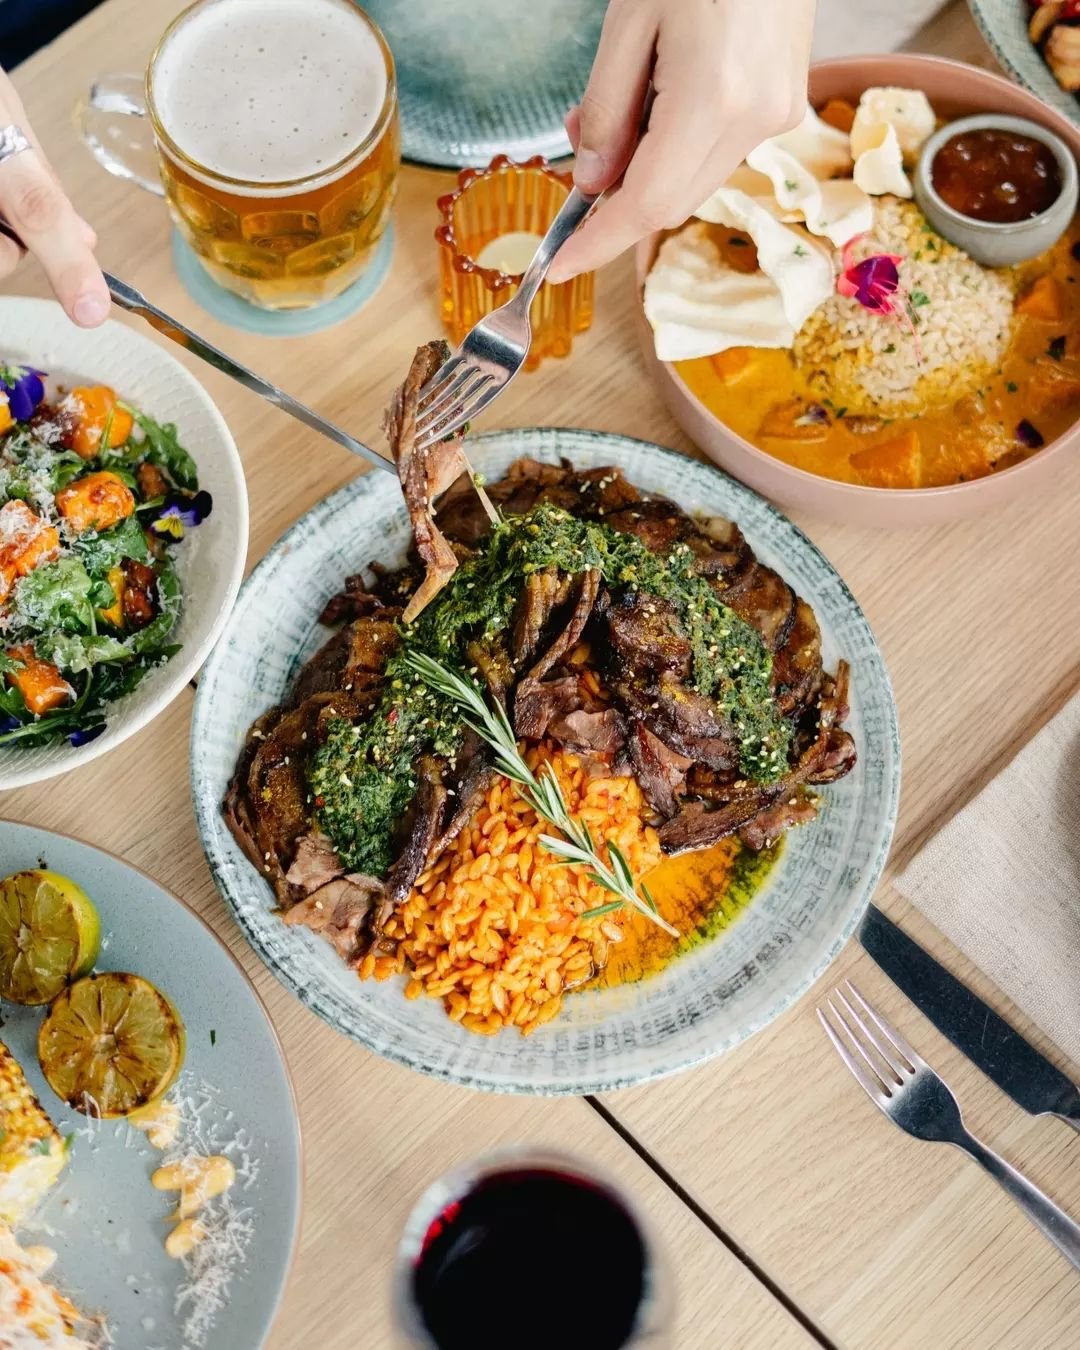 EOFY is fast approaching so get the crew together for a long lunch at the Subi!

Our Feasting Menu is perfect for groups of 25 plus, for function enquiries click the link in bio.